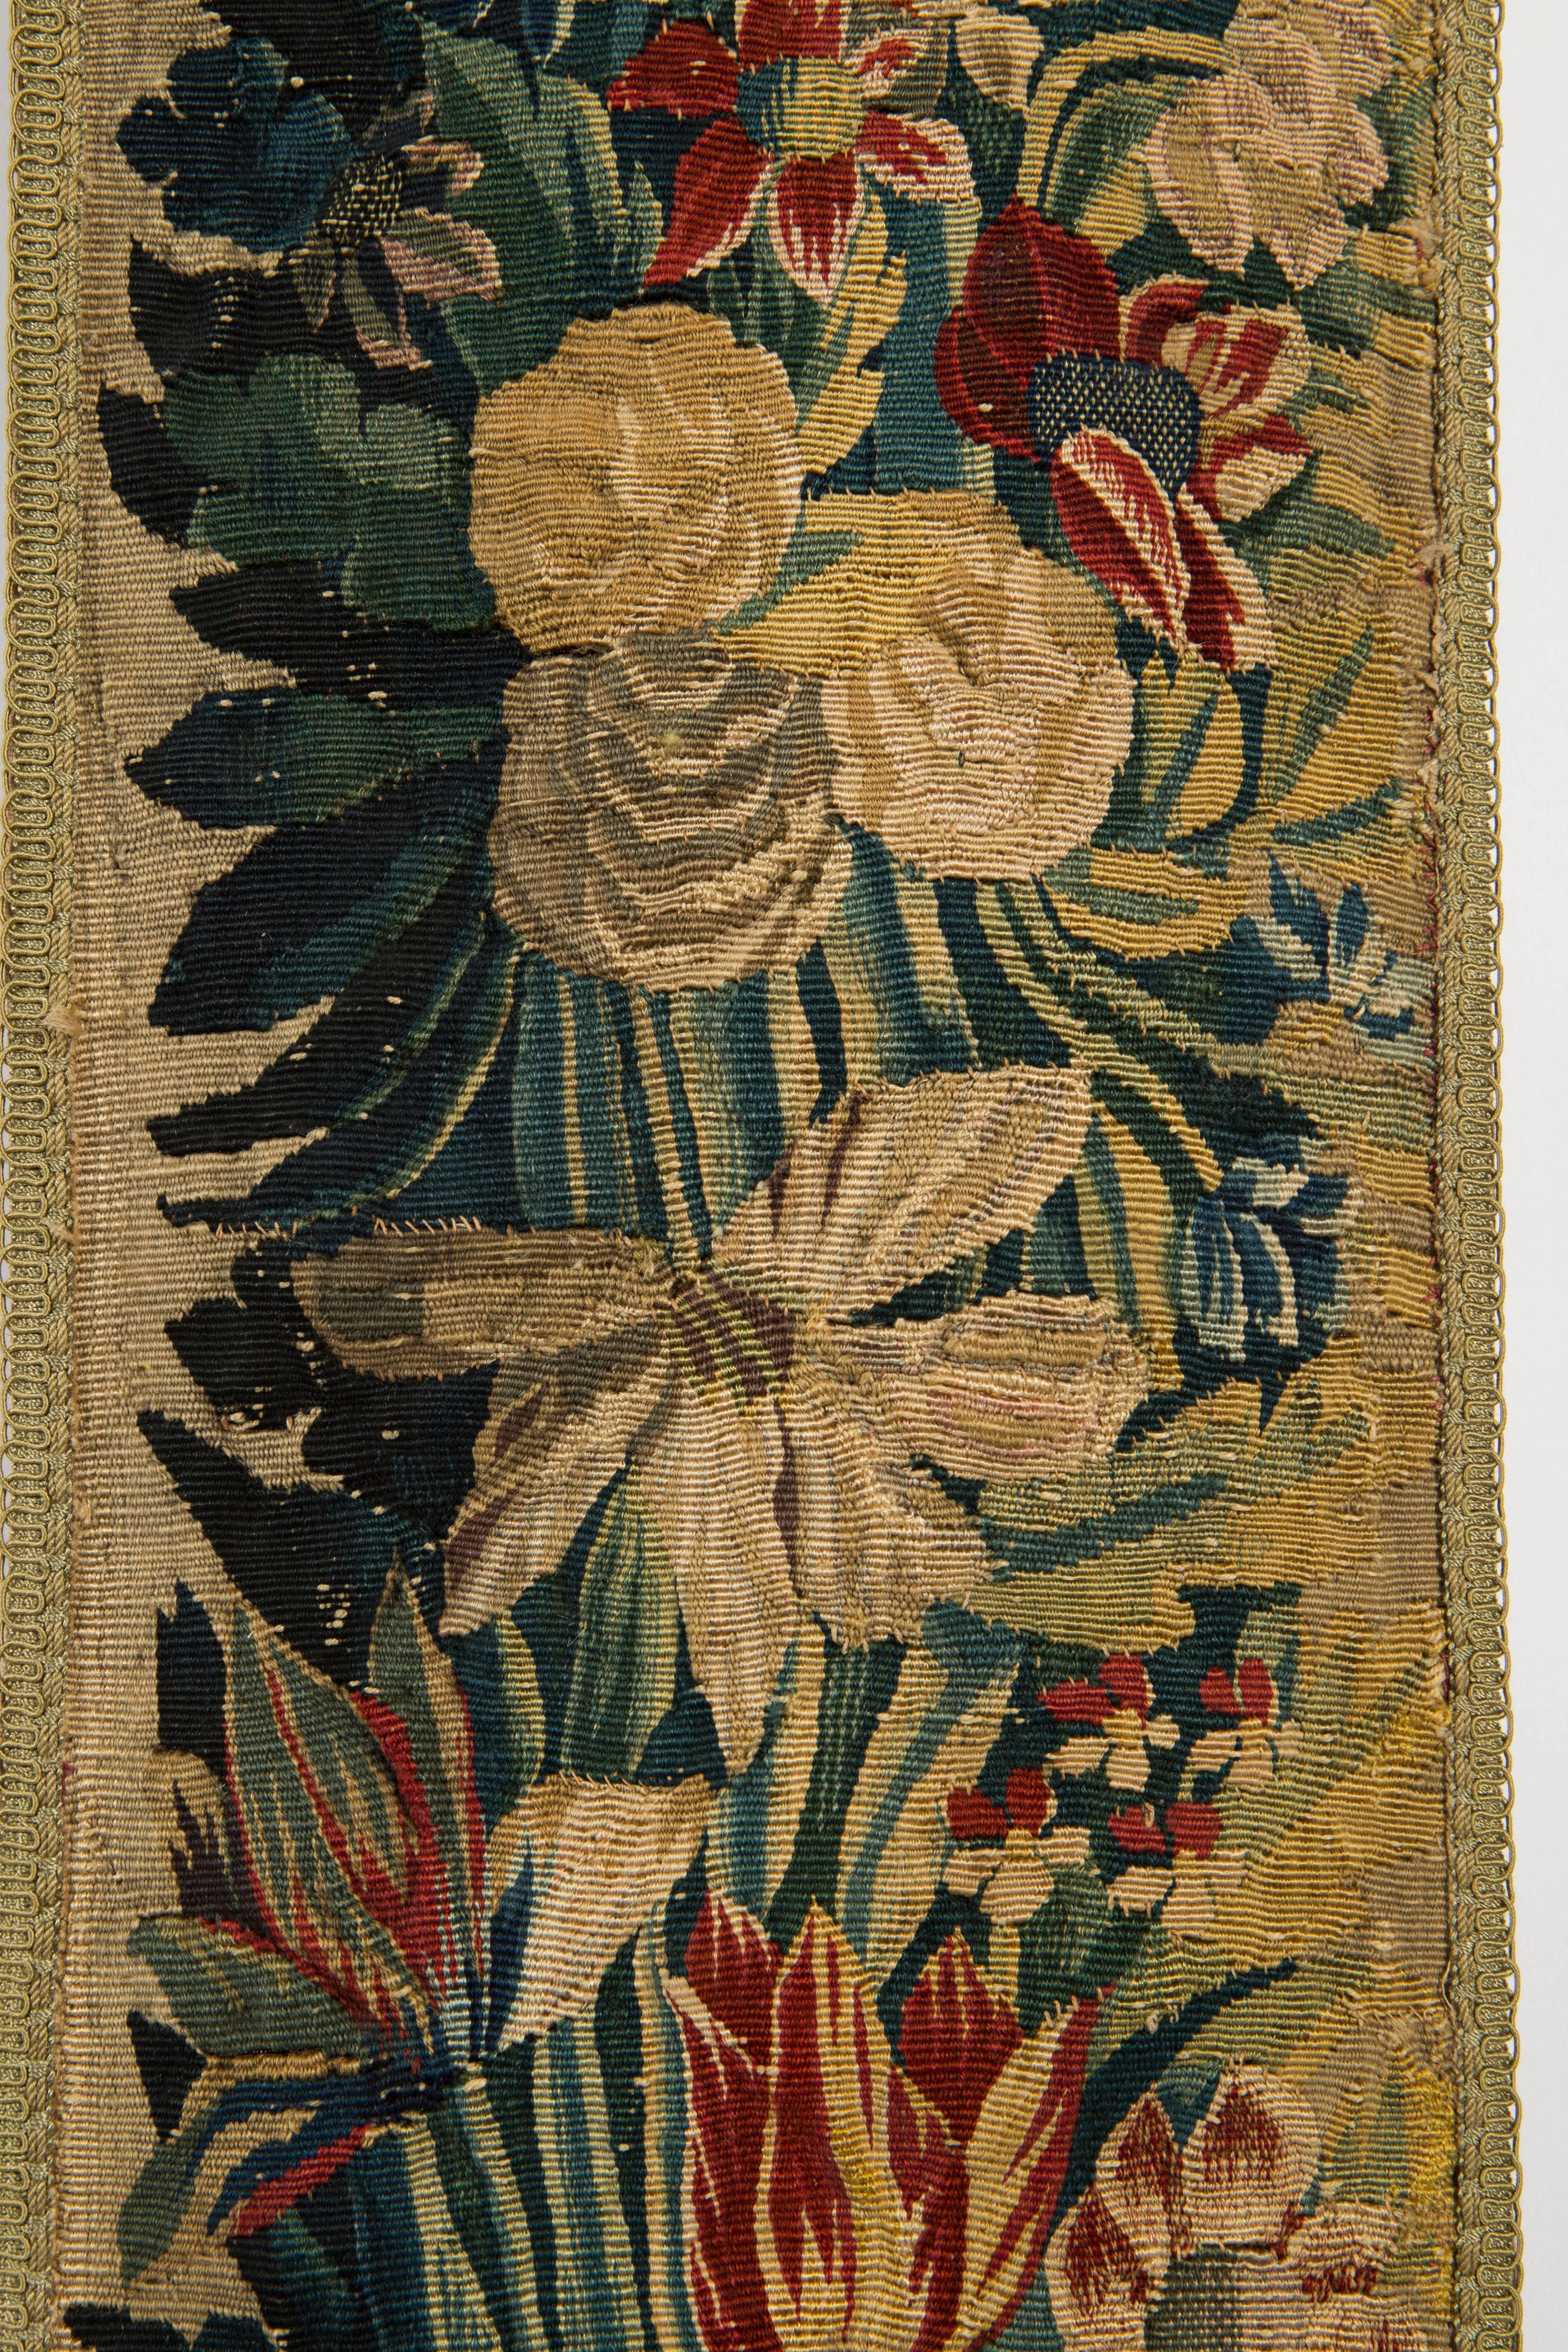 Hand-Woven Late 17th Century Flemish Floral Tapestry in Blues and Red